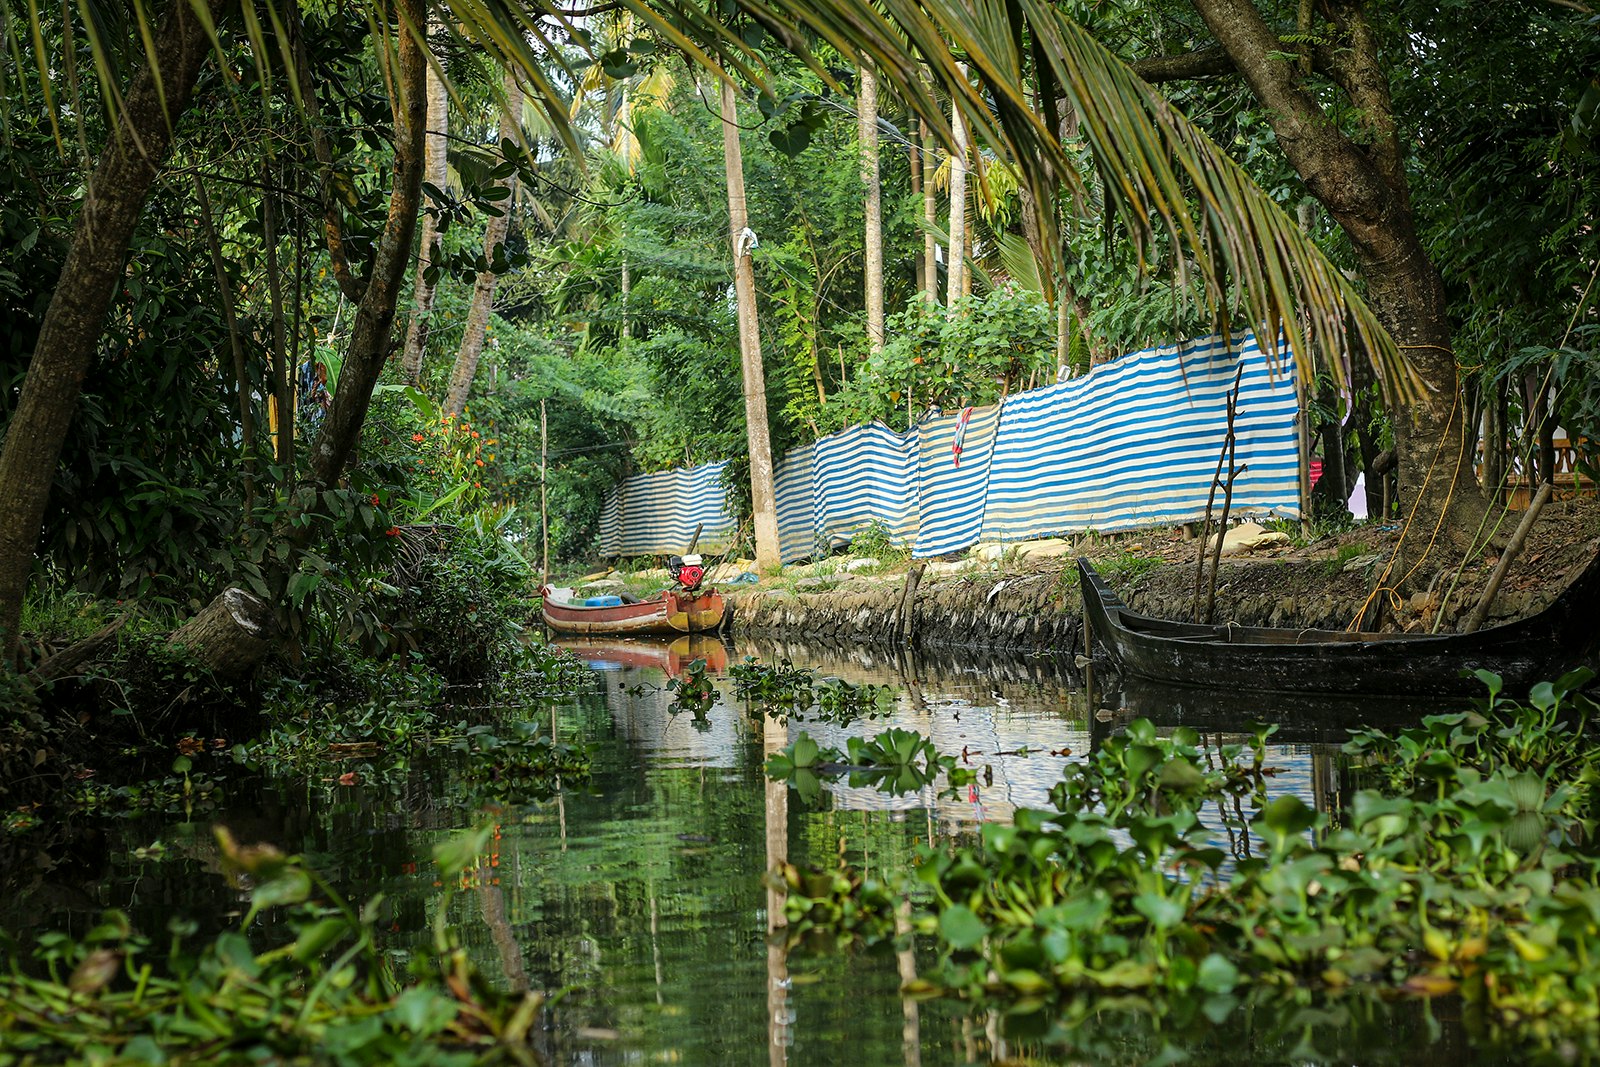 A boat floating in the verdant backwaters south of Kochi, India.